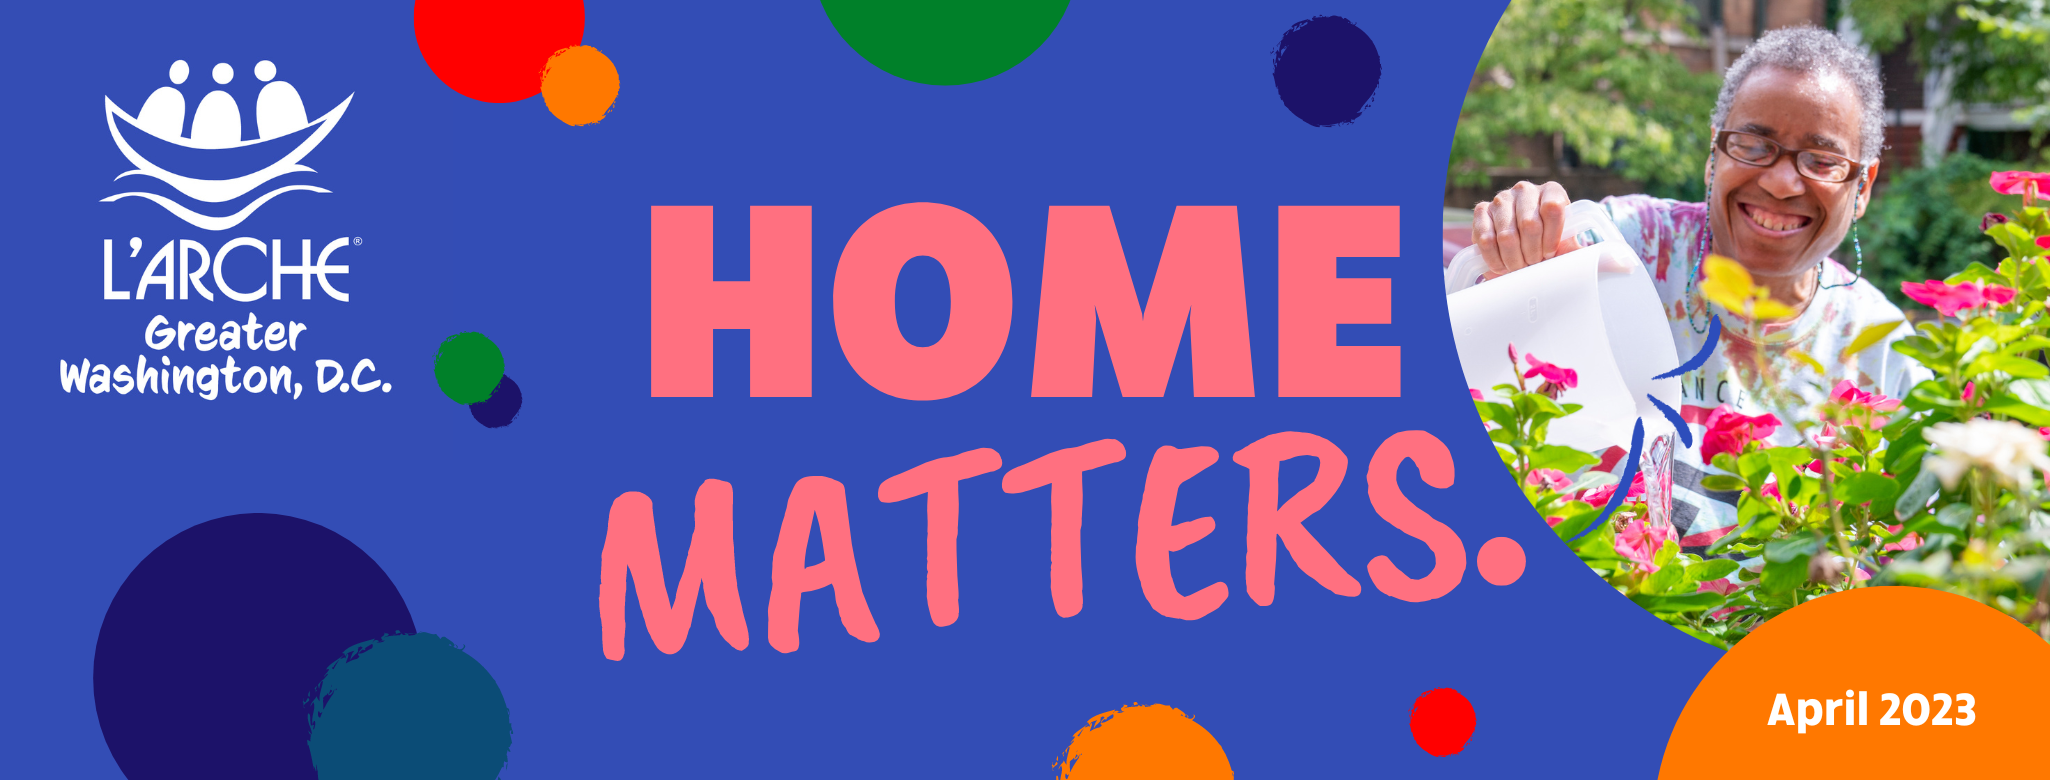 Newsletter header. Text reads "Home Matters." Decorative Photo of Eileen watering flowers. Bottom right text reads: "April 2023"